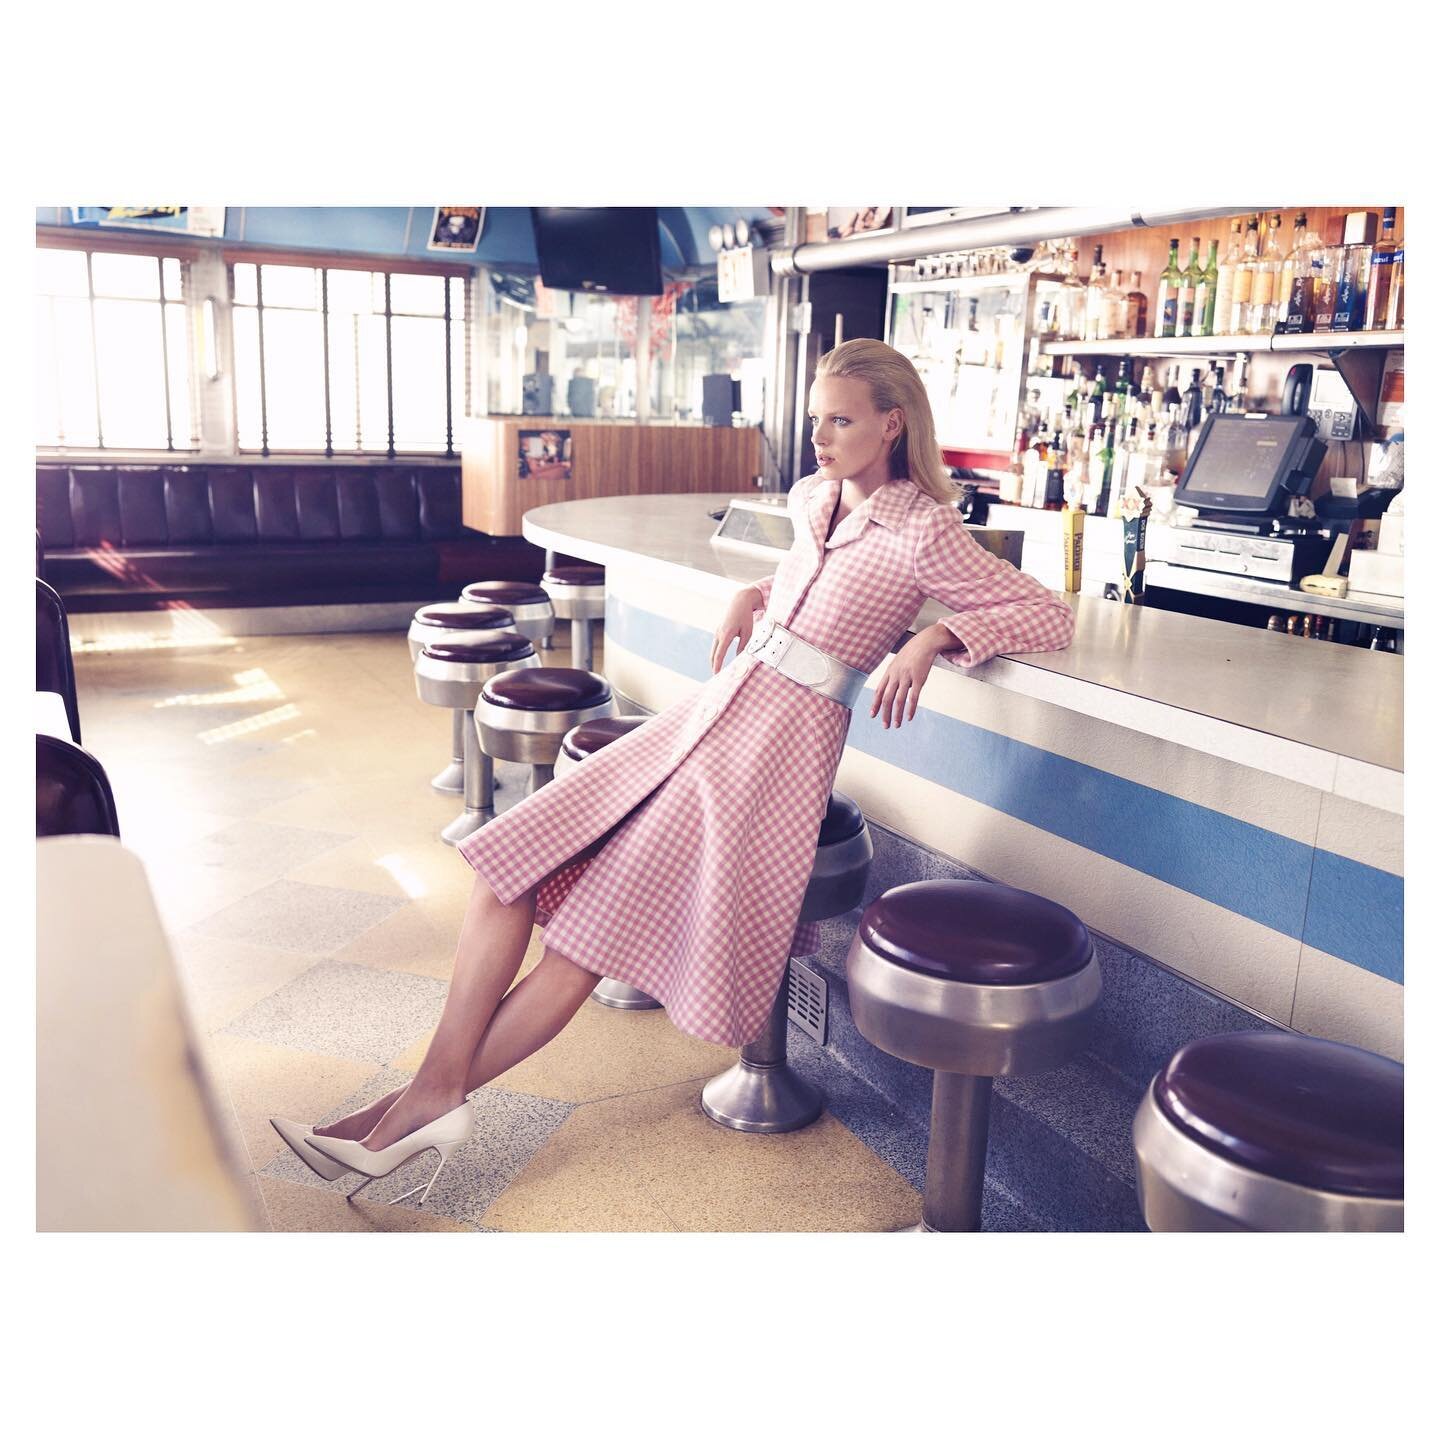 Vogue Mexico with 
Beautiful @dorithmous 
styled by @lizthody 
dress &amp; shoes by @prada 
hair and makeup by @borghelen stylist assistant @sophie_bew thanks Café de la Esquina in Brooklyn @voguemexico 2013 #vogue #prada